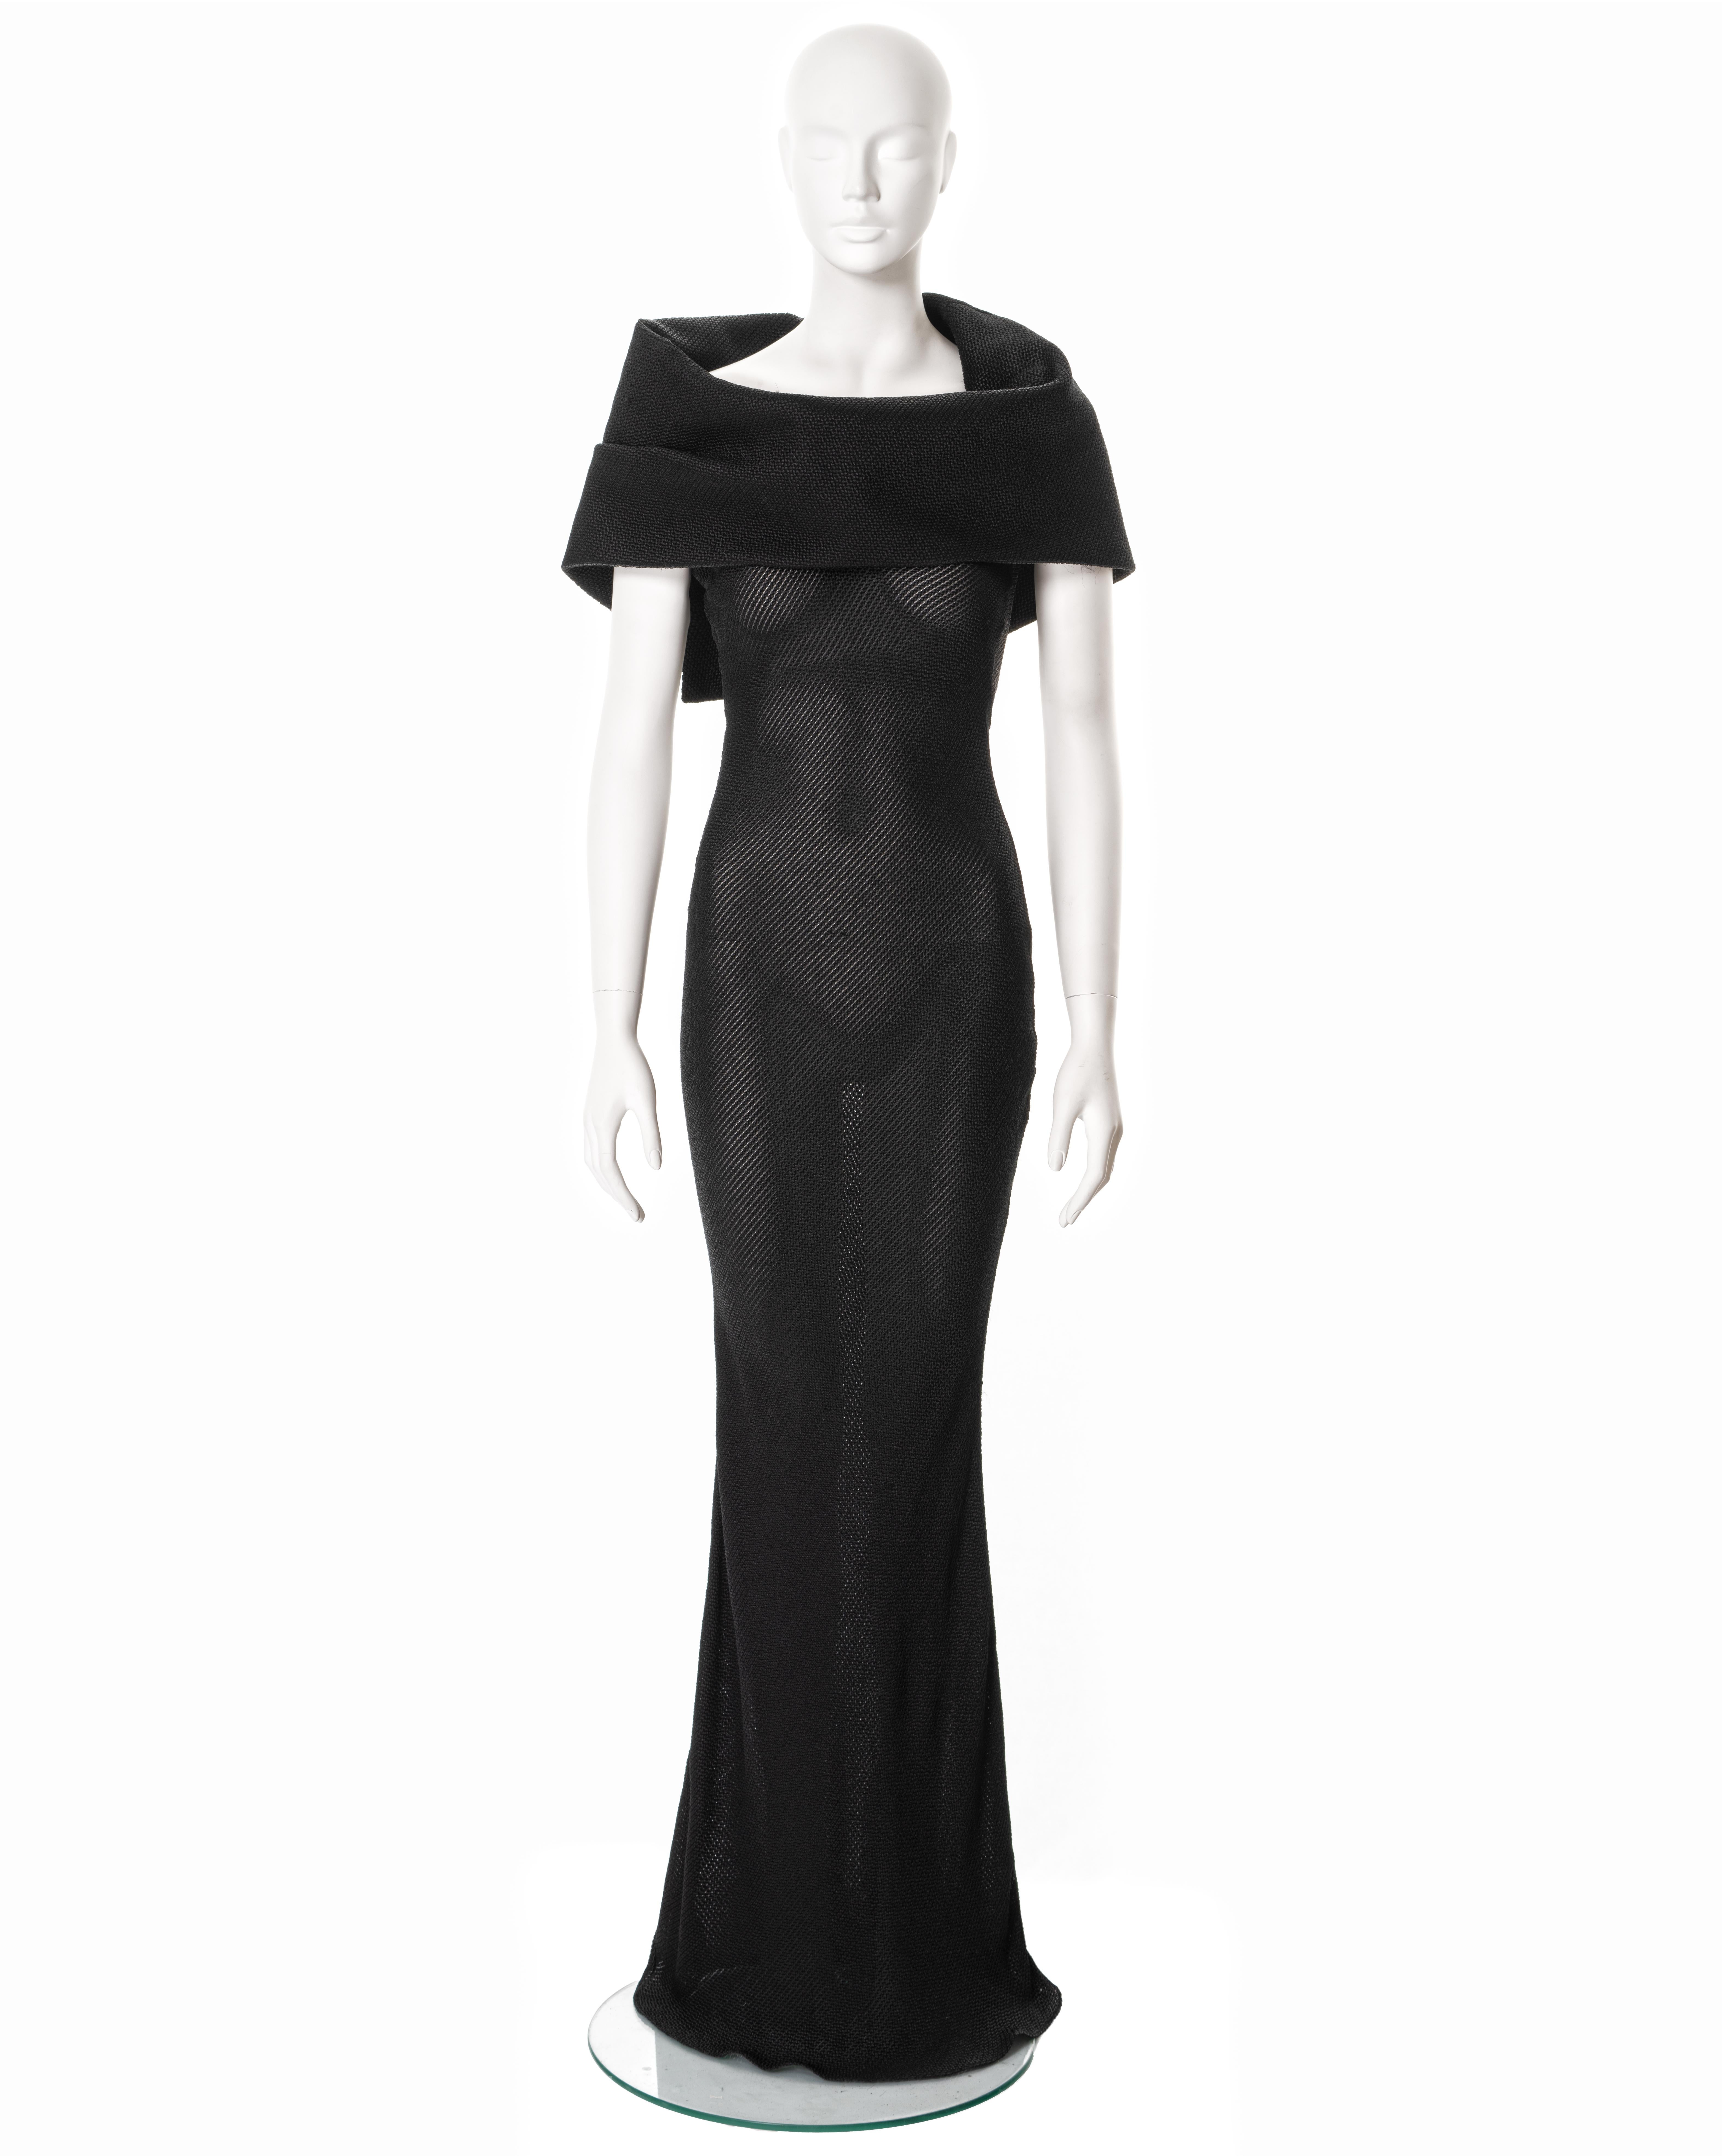 ▪ John Galliano black evening dress
▪ Fall-Winter 1999
▪ Constructed from black bias-cut viscose with embroidered silk stripes 
▪ Large draped turn-over collar 
▪ Floor-length skirt 
▪ Size FR 36 - UK 8 
▪ Made in France

All photographs in this